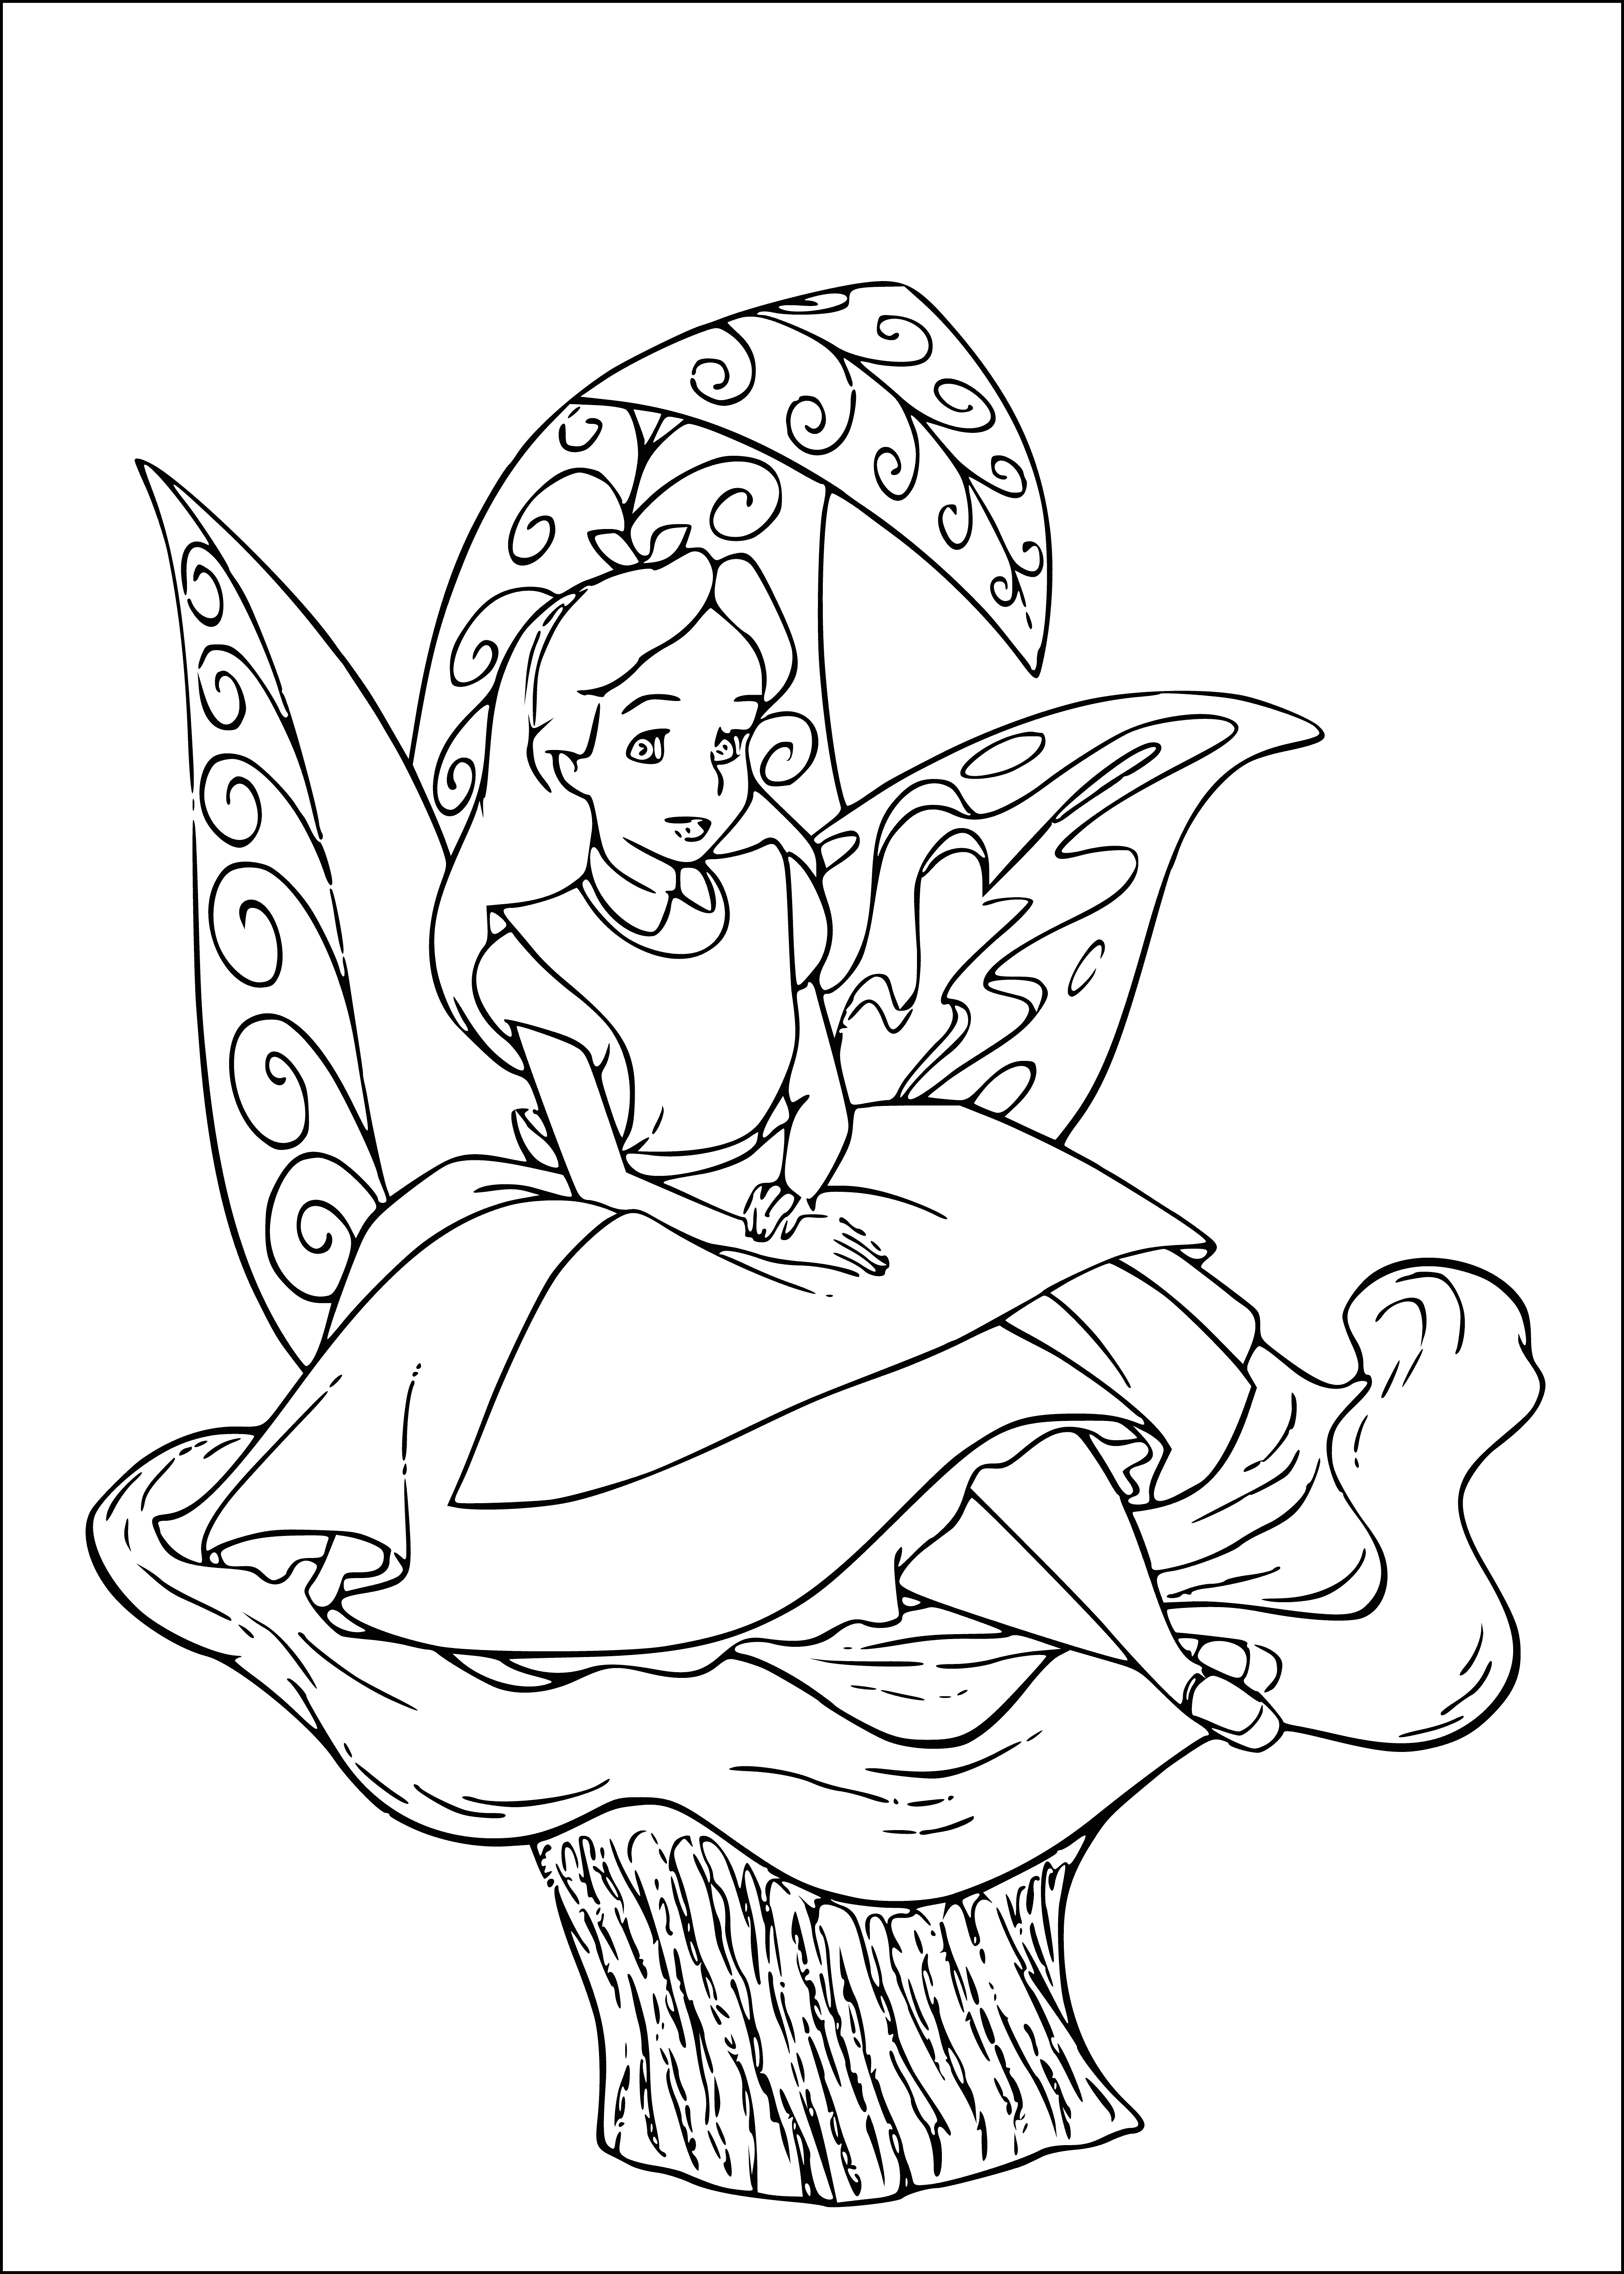 coloring page: Alice has a chat with a bluebird while sitting on a toadstool in a mossy forest.